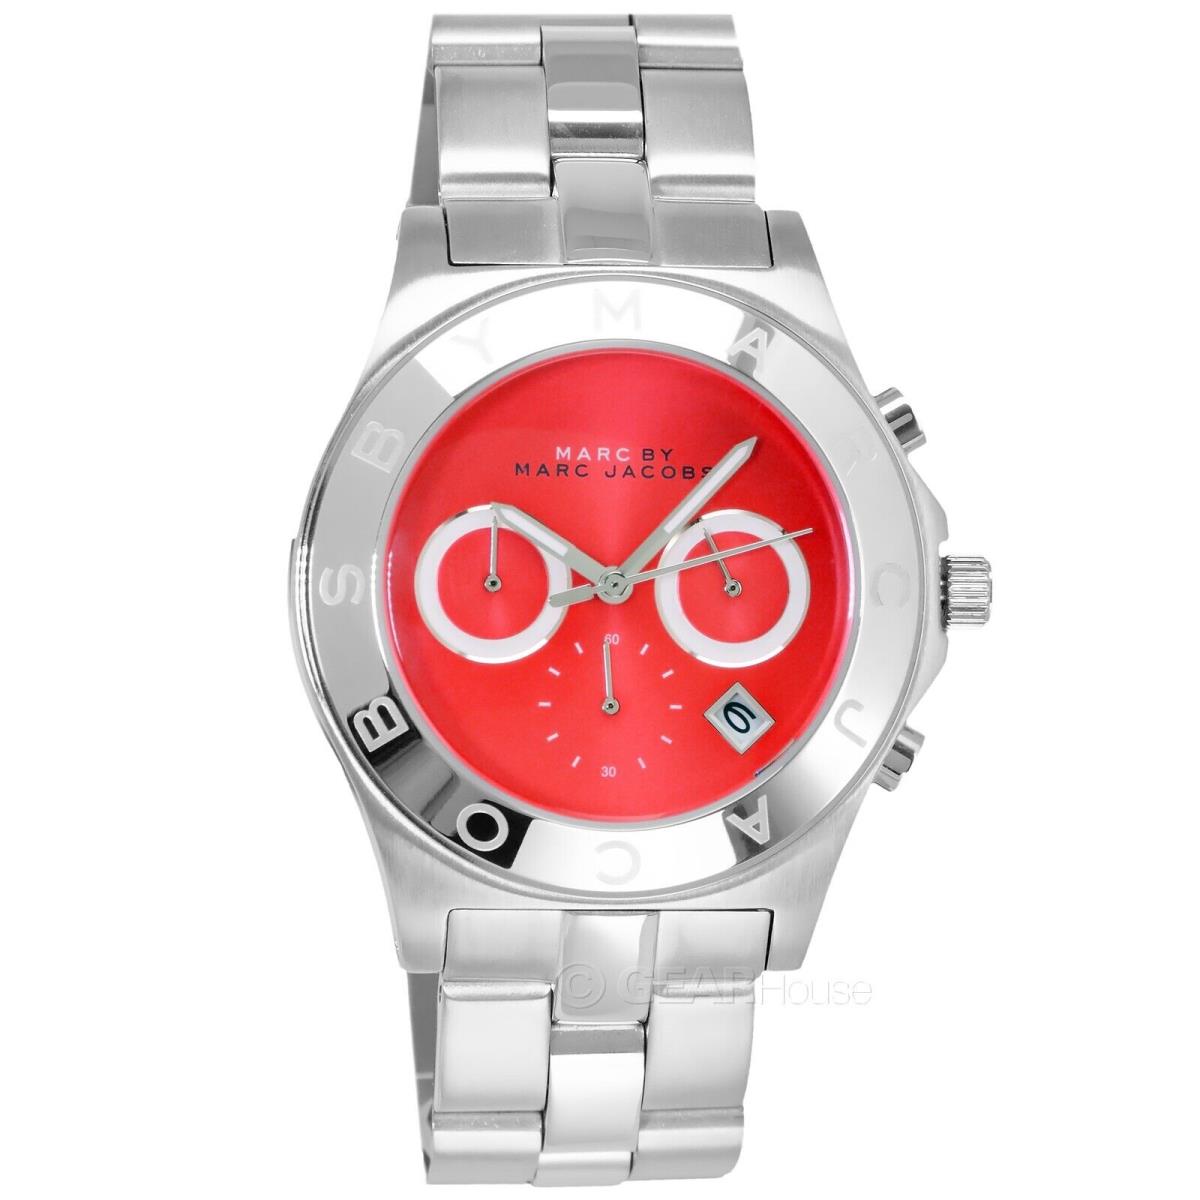 Marc Jacobs watch Marc Blade - Red Dial, Silver Band, Silver Bezel